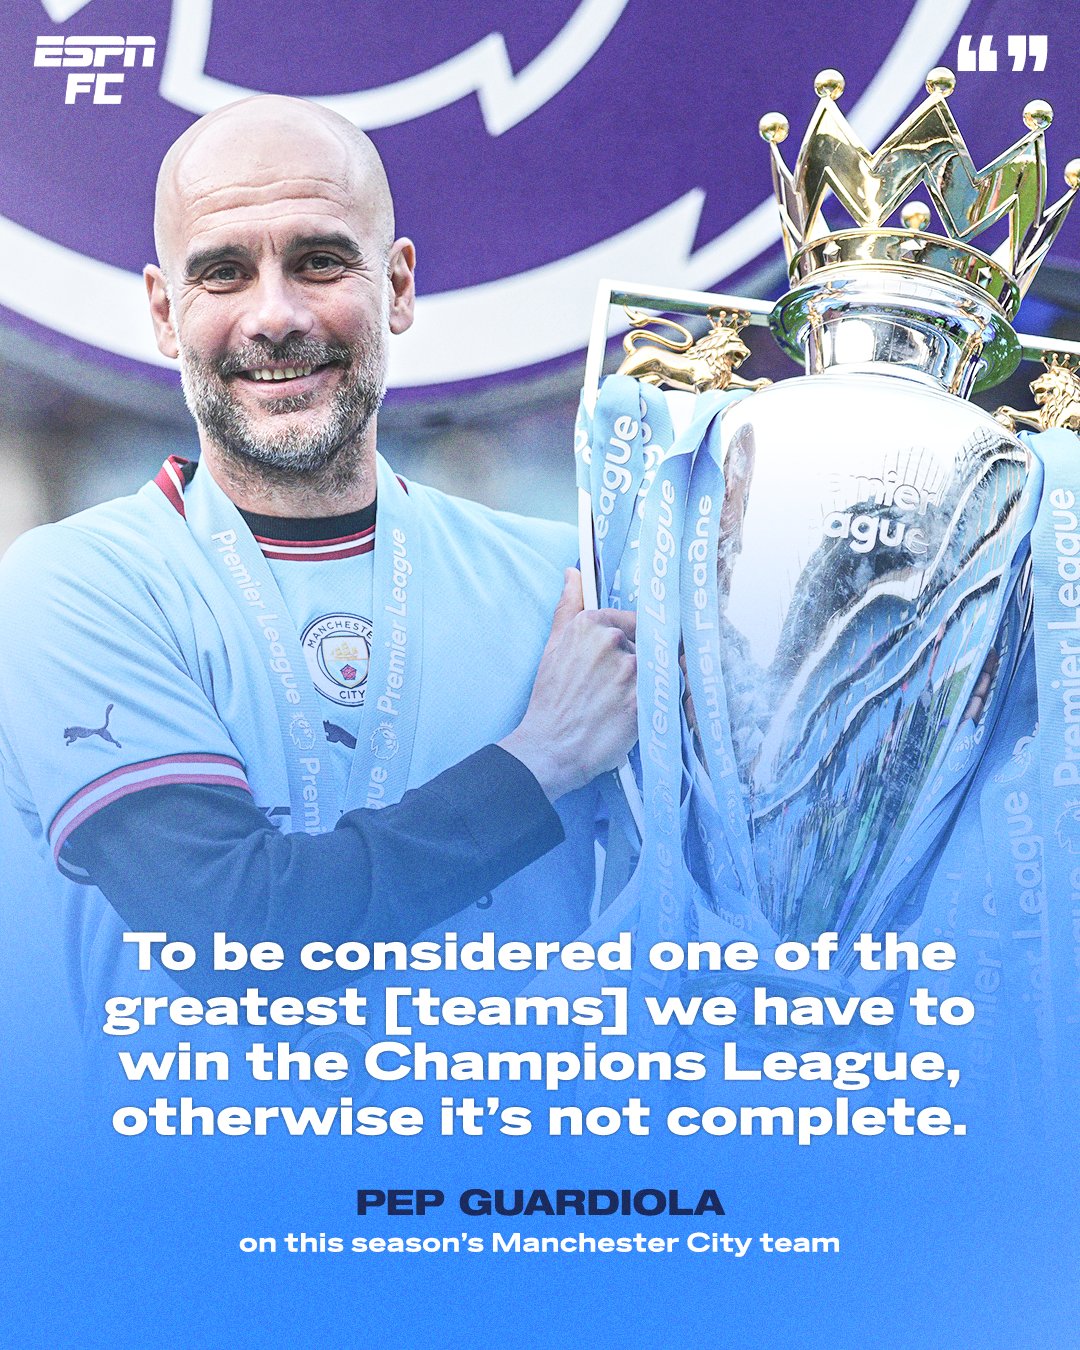 ESPN FC on X: Pep Guardiola said Man City has to win the Champions League  in order to be considered one of the greatest teams in history 👀   / X